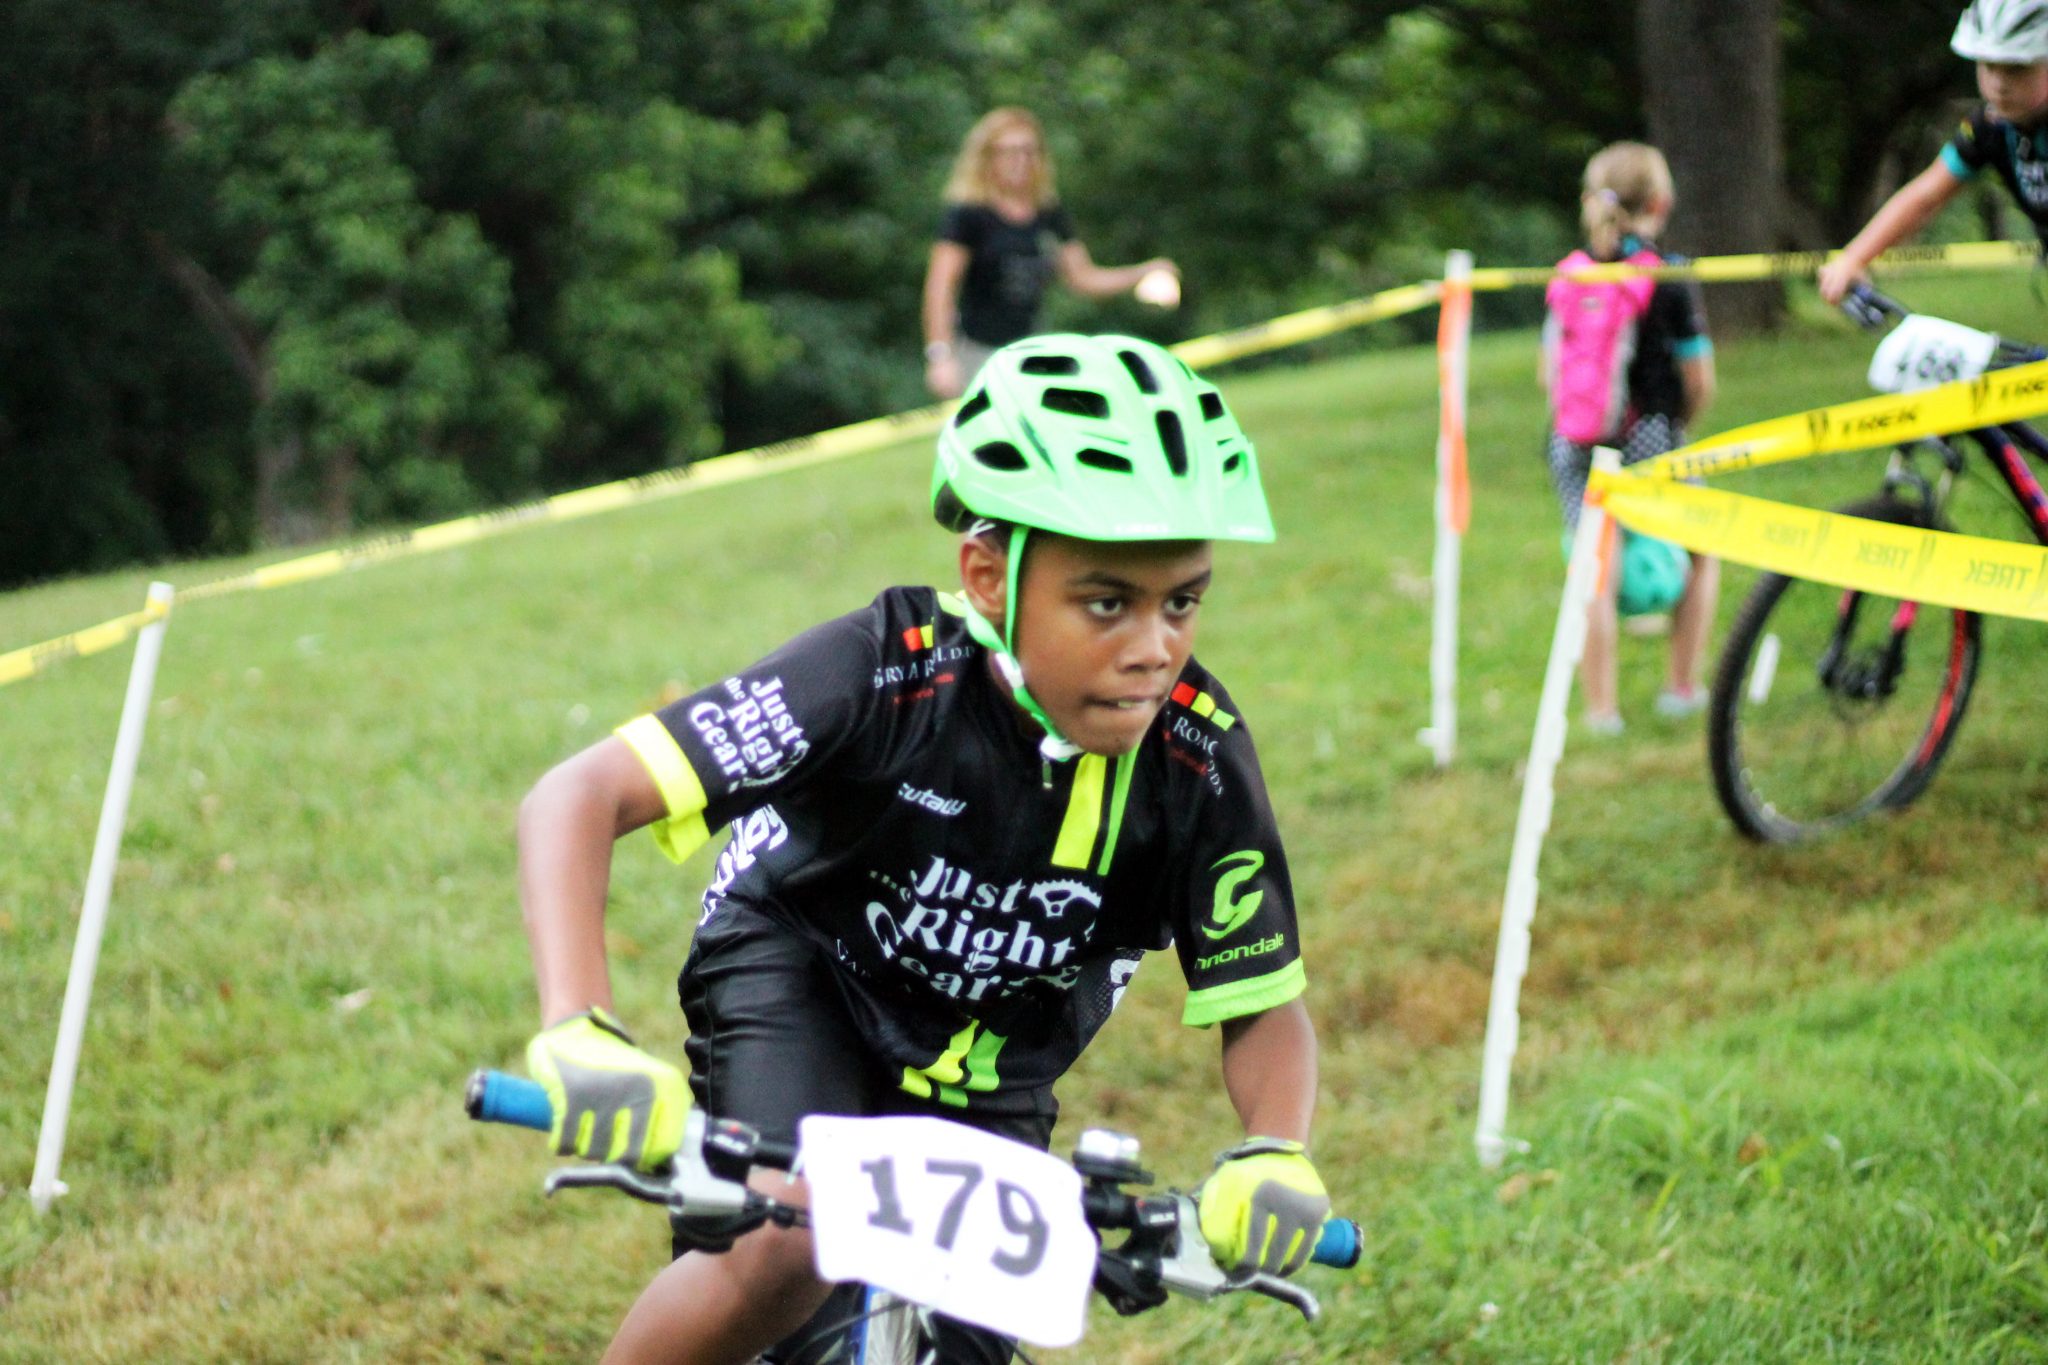 Fishburn youth mountain biker rides out of a turn